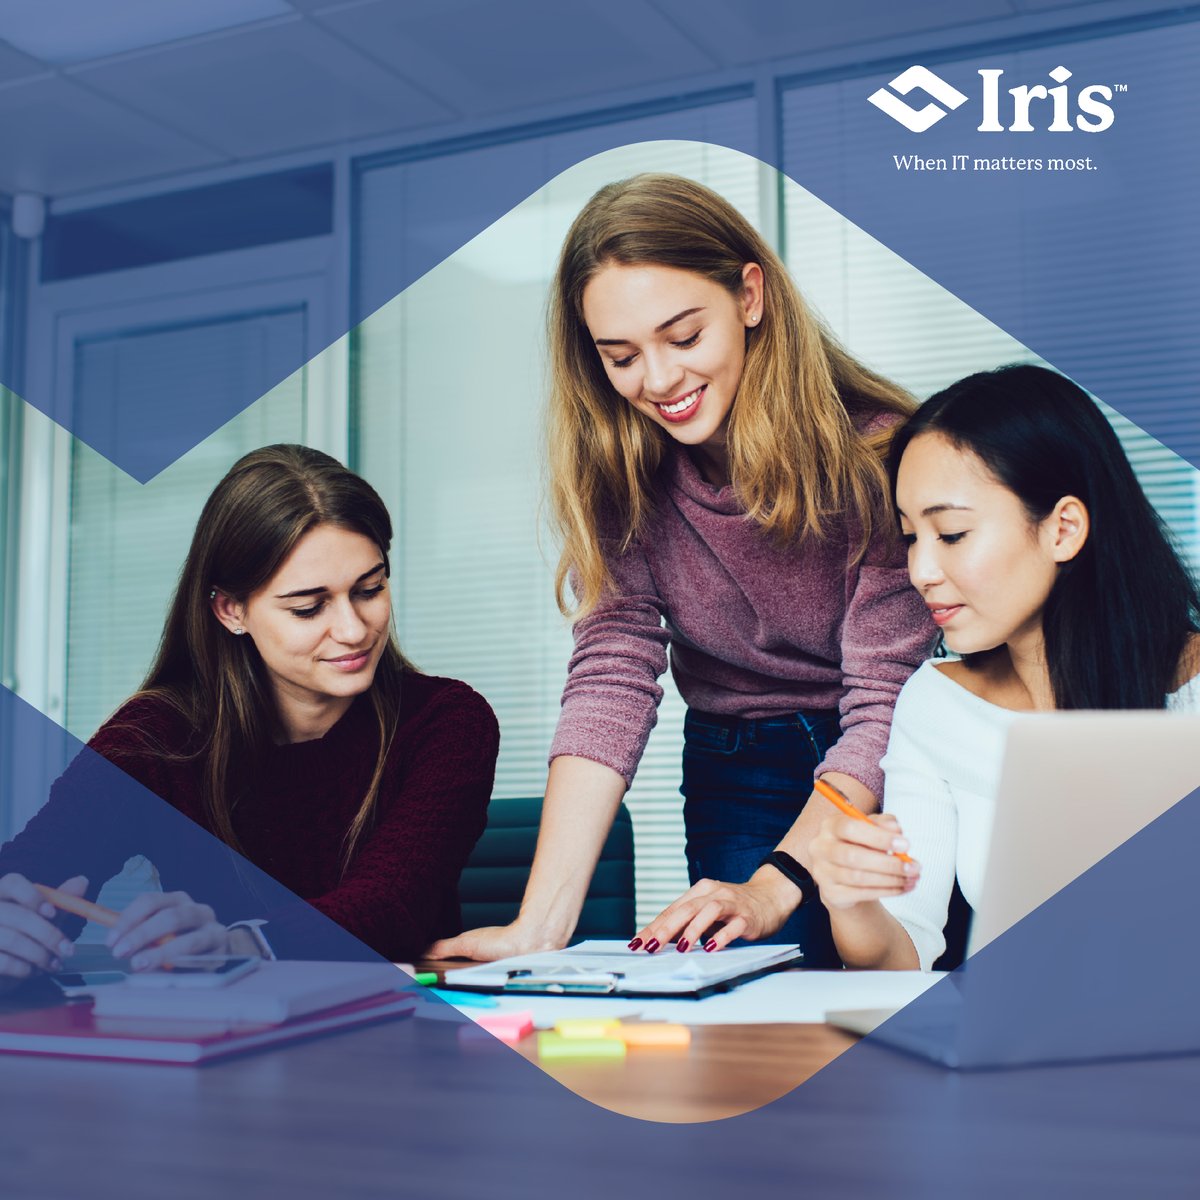 Helping our clients achieve their business goals by fully leveraging technology, while providing an unparalleled, personalized client and employee experience. Learn more at irissoftware.com/about/

#Iris #IrisSoftware #WhenITmattersmost #IrisMission